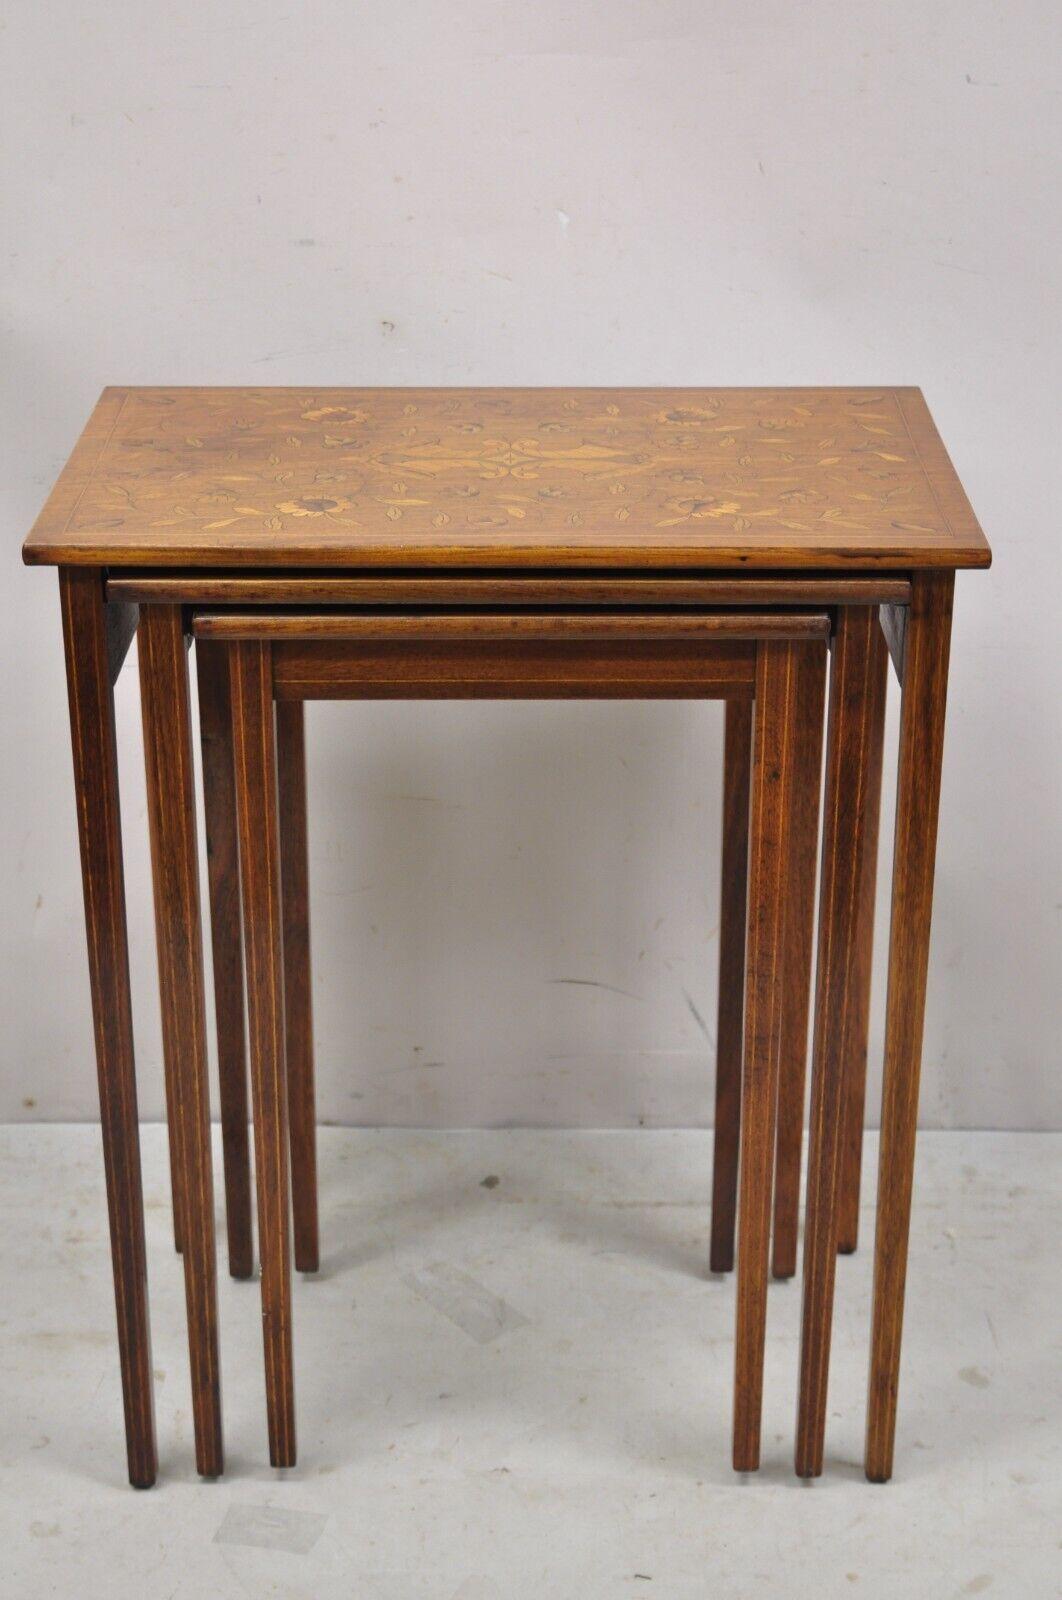 Antique Dutch Marquetry Inlay Mahogany nesting side tables - 3 Pc Set. Item features 3 graduating sizes, satinwood floral inlay, on all 3 tops, beautiful wood grain, tapered legs, very nice vintage set, great style and form. Circa Early